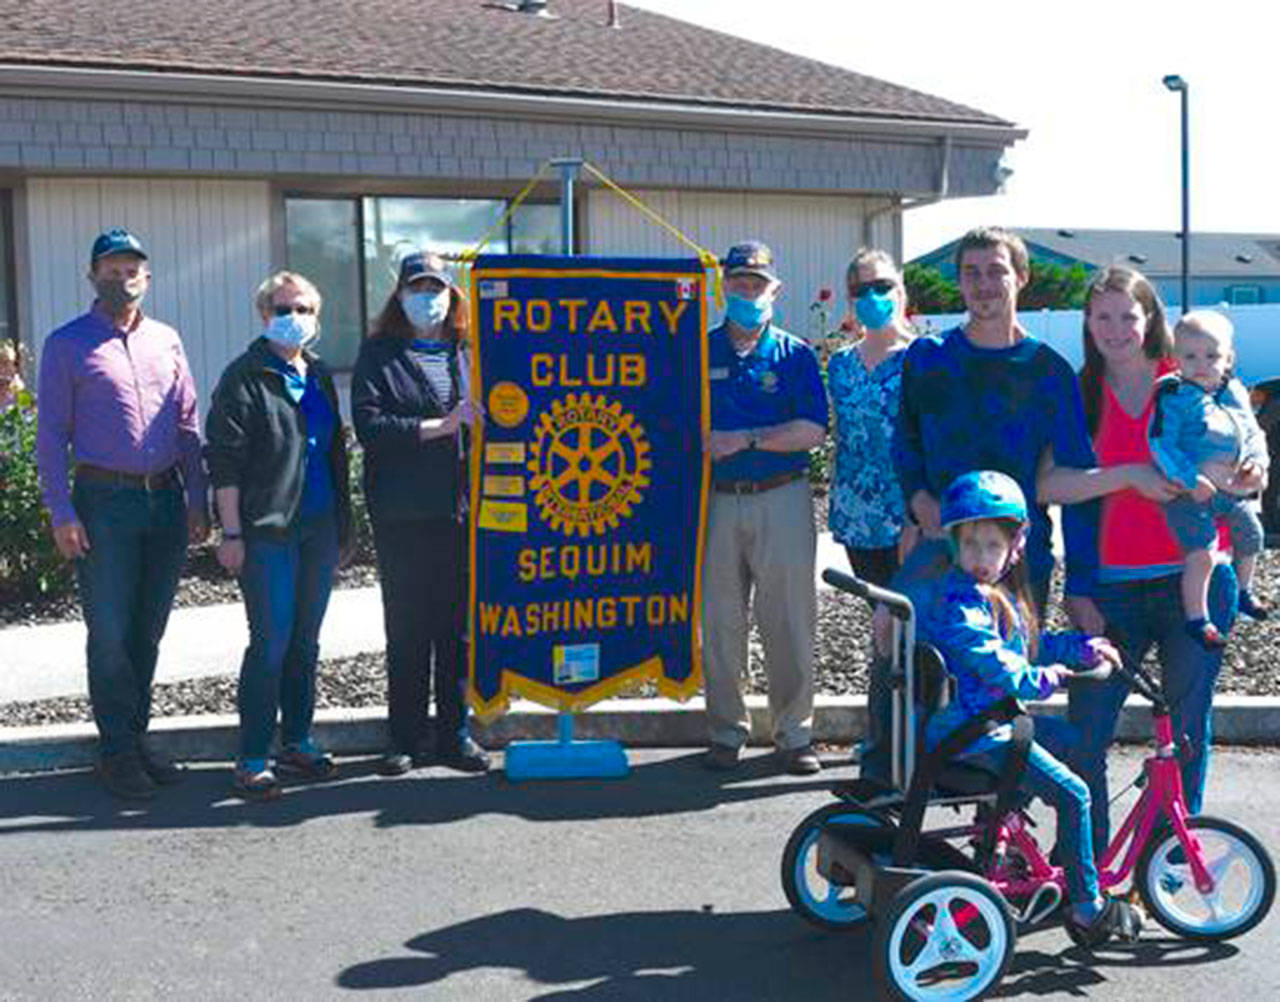 Members of the Rotary Club of Sequim (from left, Jason Bausher, Rochelle McHugh, Pat Zane and Jim Jones) join physical therapist Cherry Bibler in presenting a Rifton adaptive tricycle to 8-year-old Jorden Topham, pictured here with parents Chris Parizo and Anna Gloor, and brother Noah. Photo by Doug Schwarz